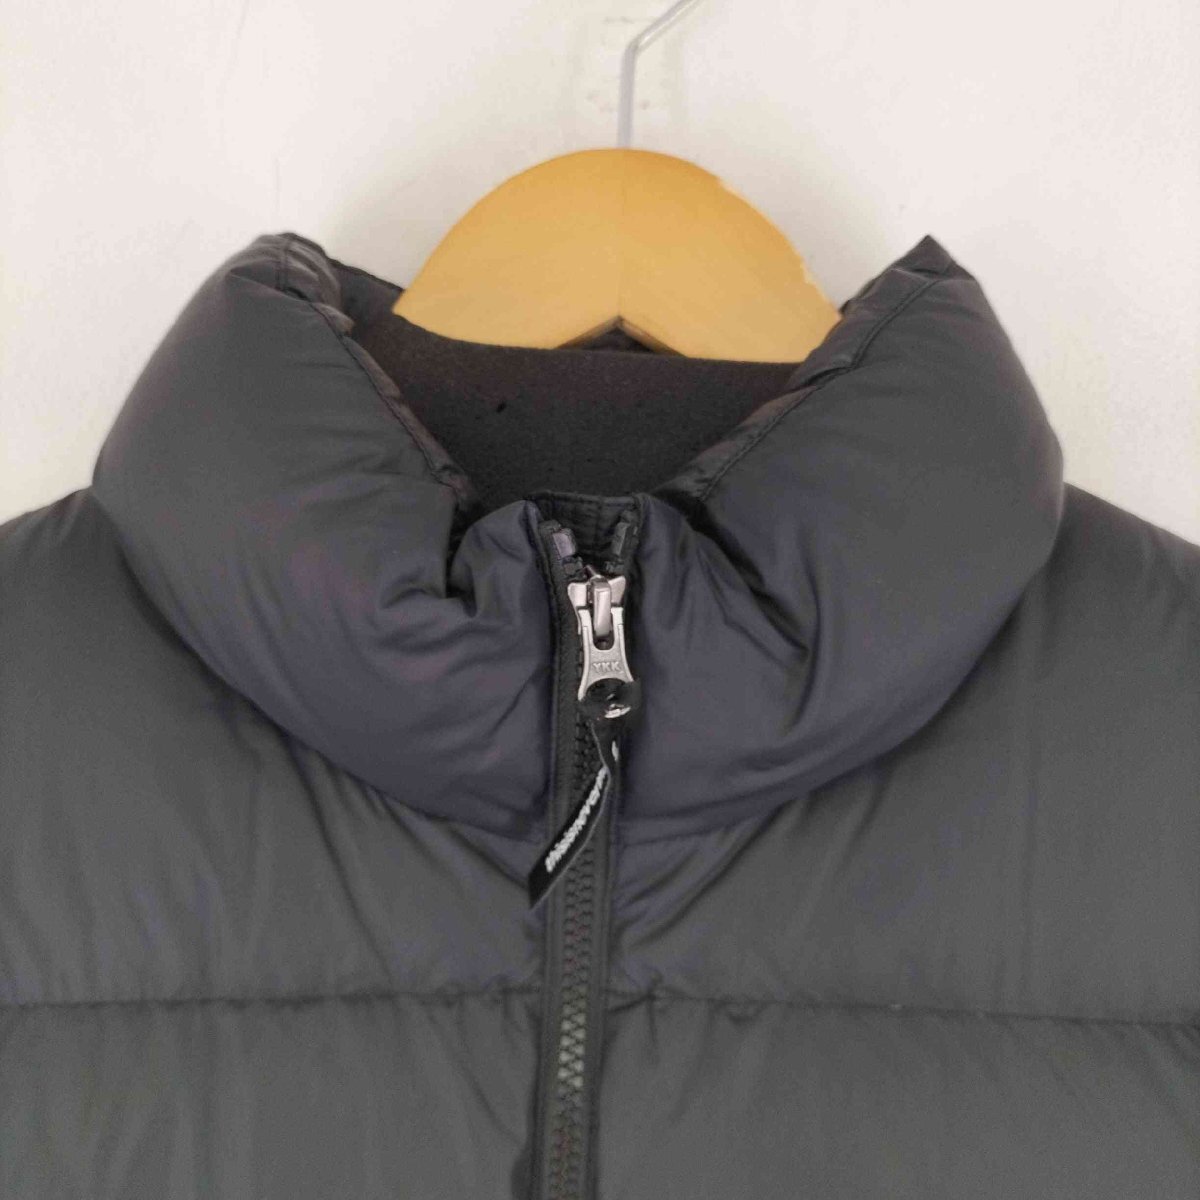 THIS IS NEVER THAT(ディスイズネバーザット) PERTEX T Down Jacket 中古 古着 0944_画像3